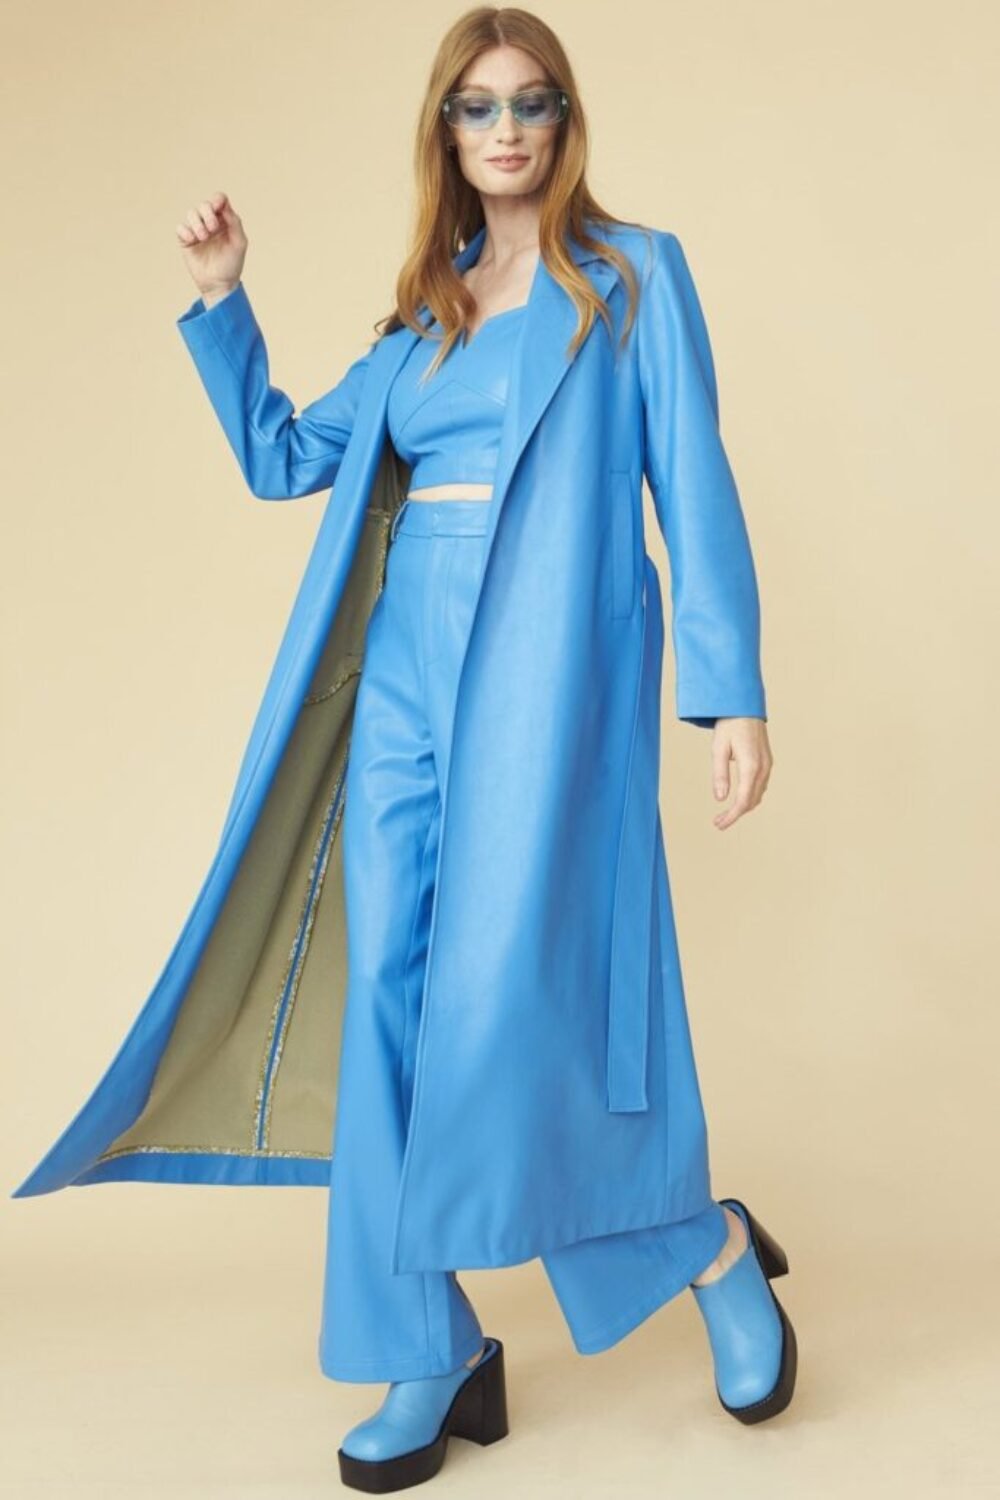 Shop Lux Blue Eco Leather Trench Coat and women's luxury and designer clothes at www.lux-apparel.co.uk